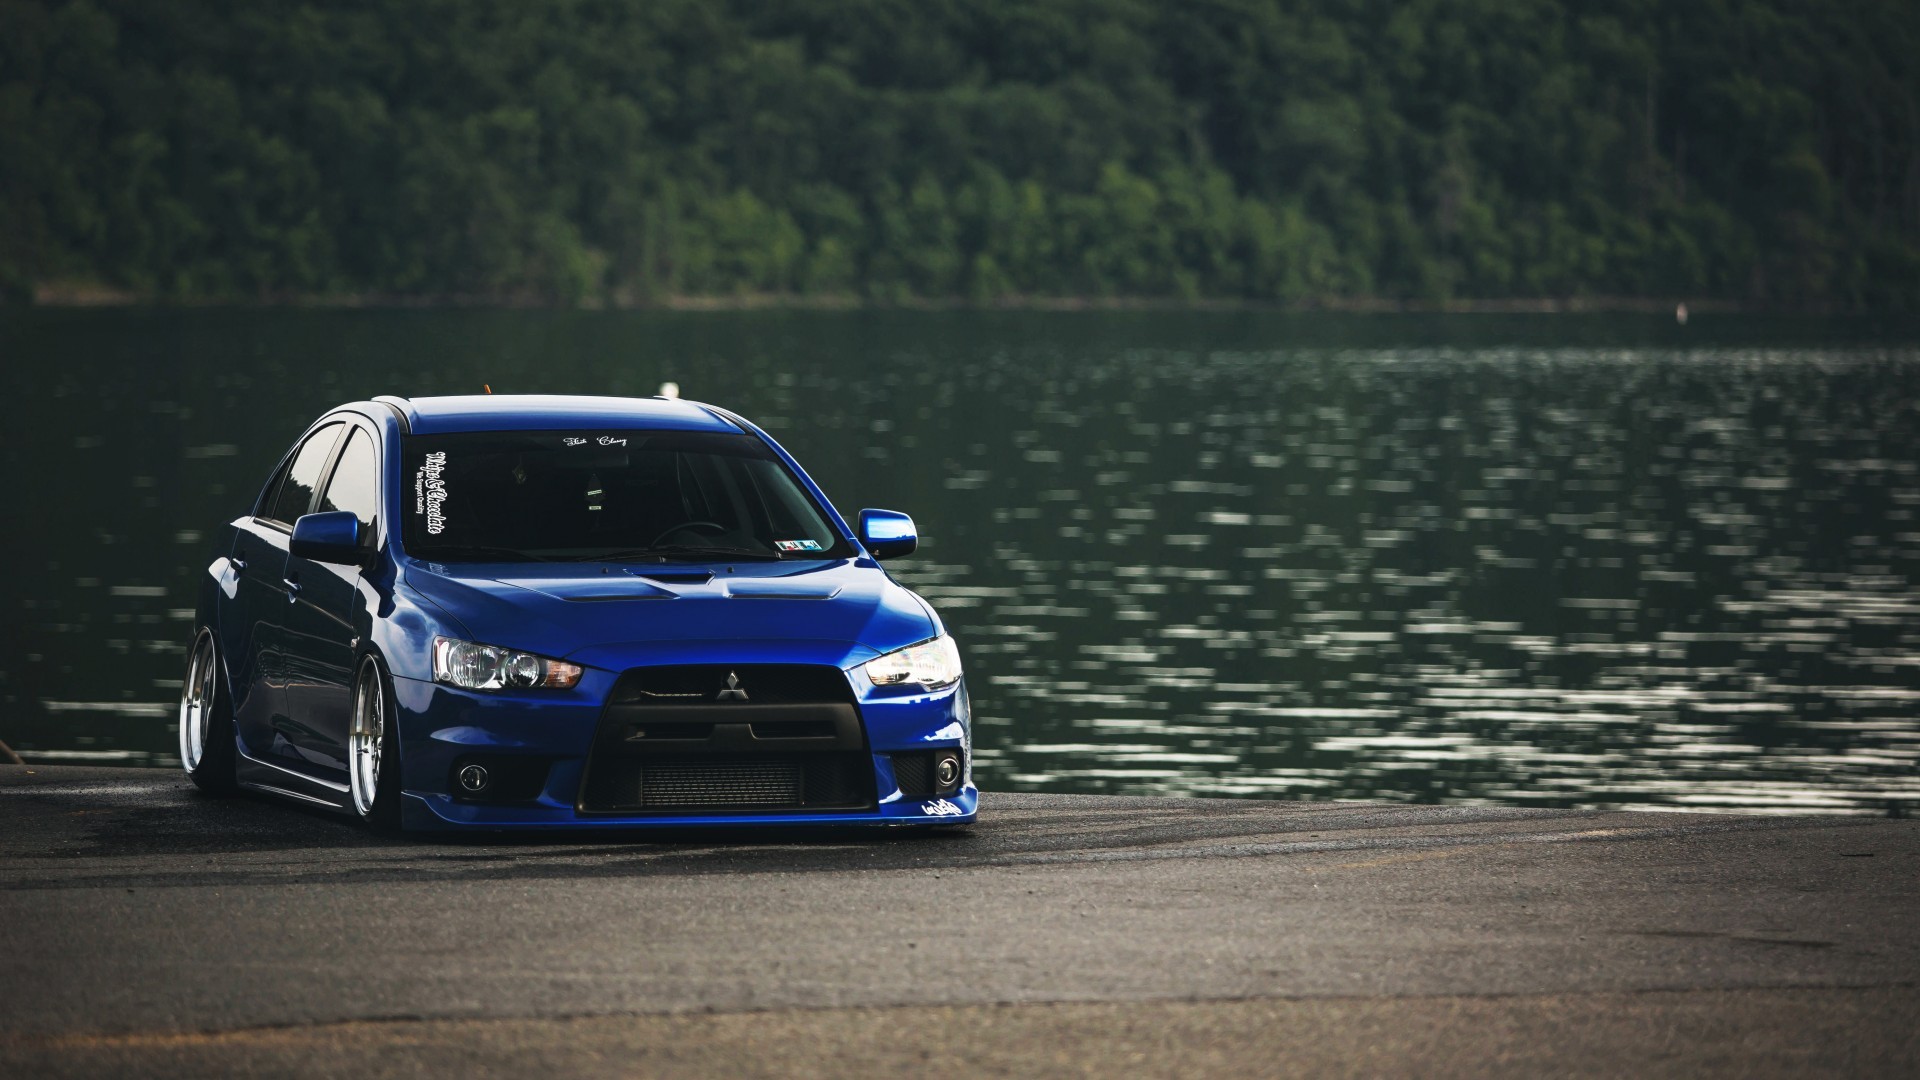 Mitsubishi Lancer Evolution wallpapers and images   wallpapers